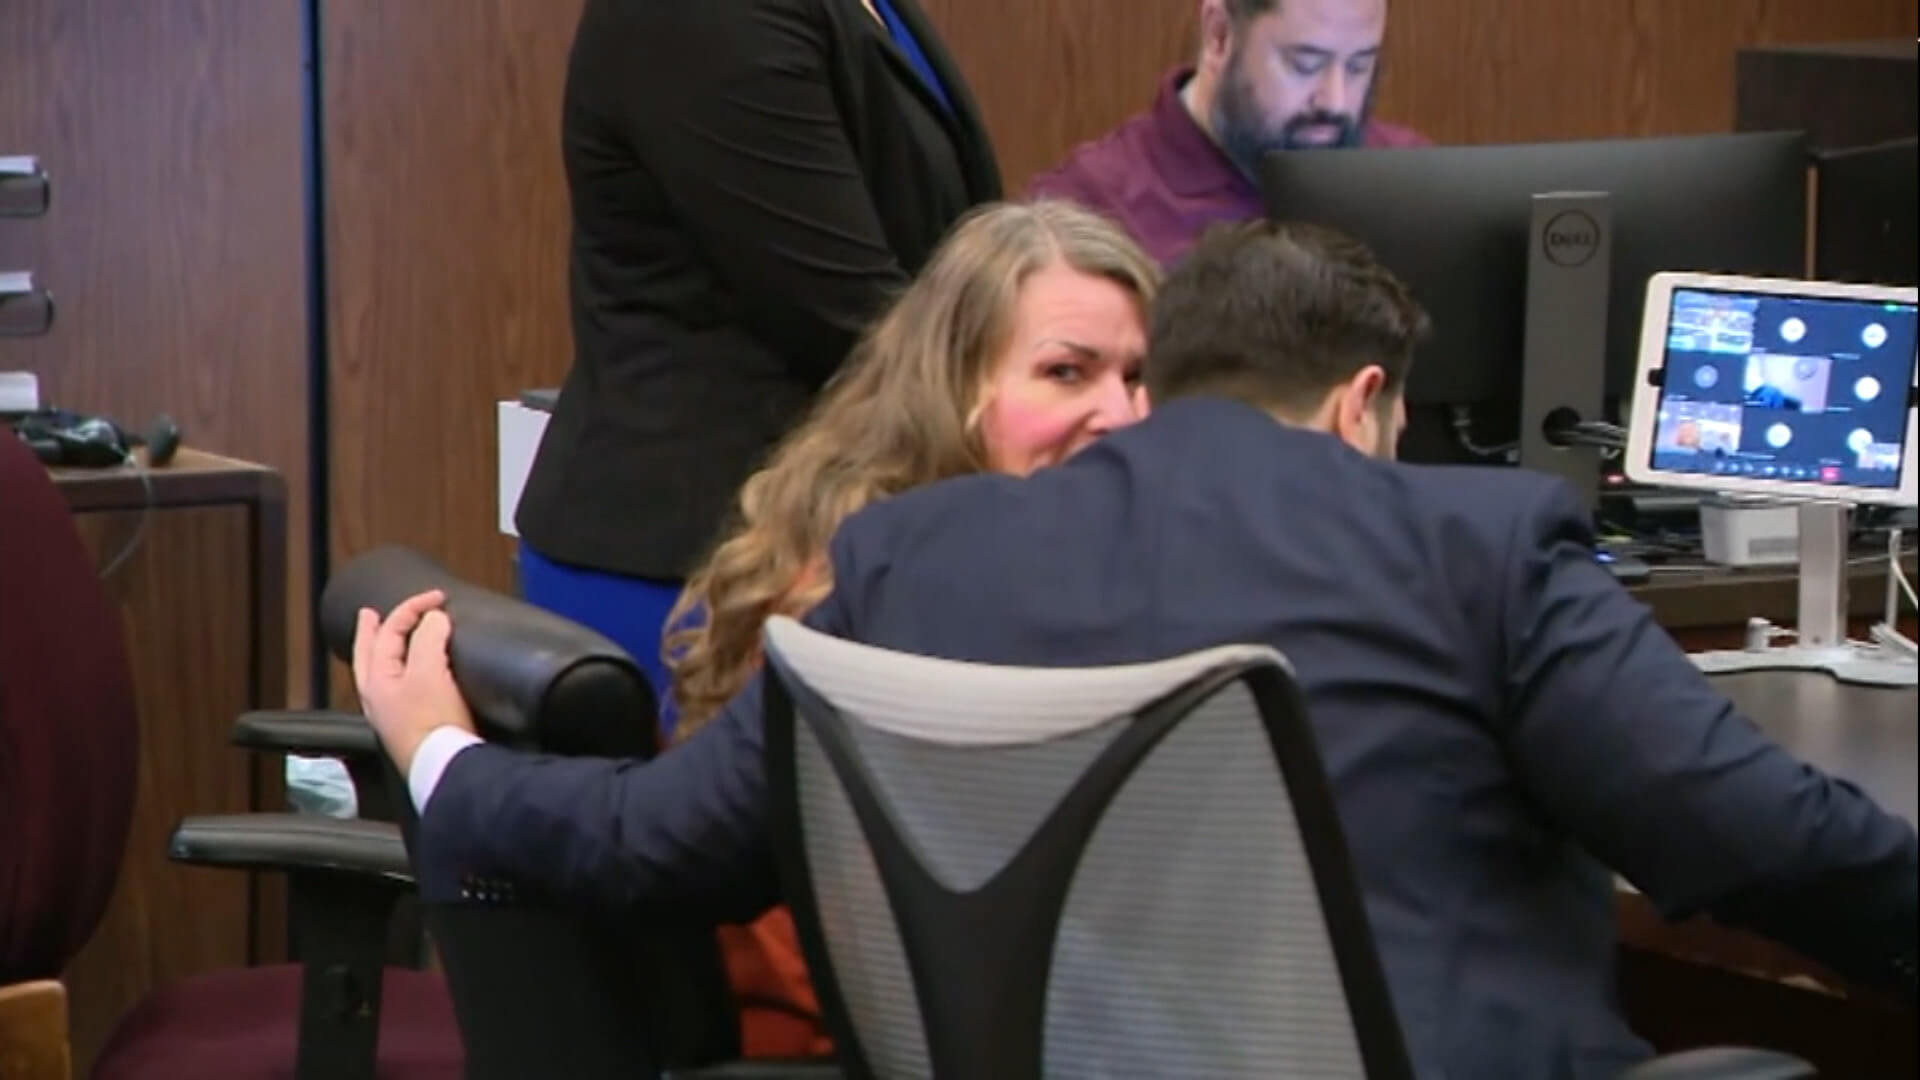 Lori Vallow Daybell appears in Arizona court